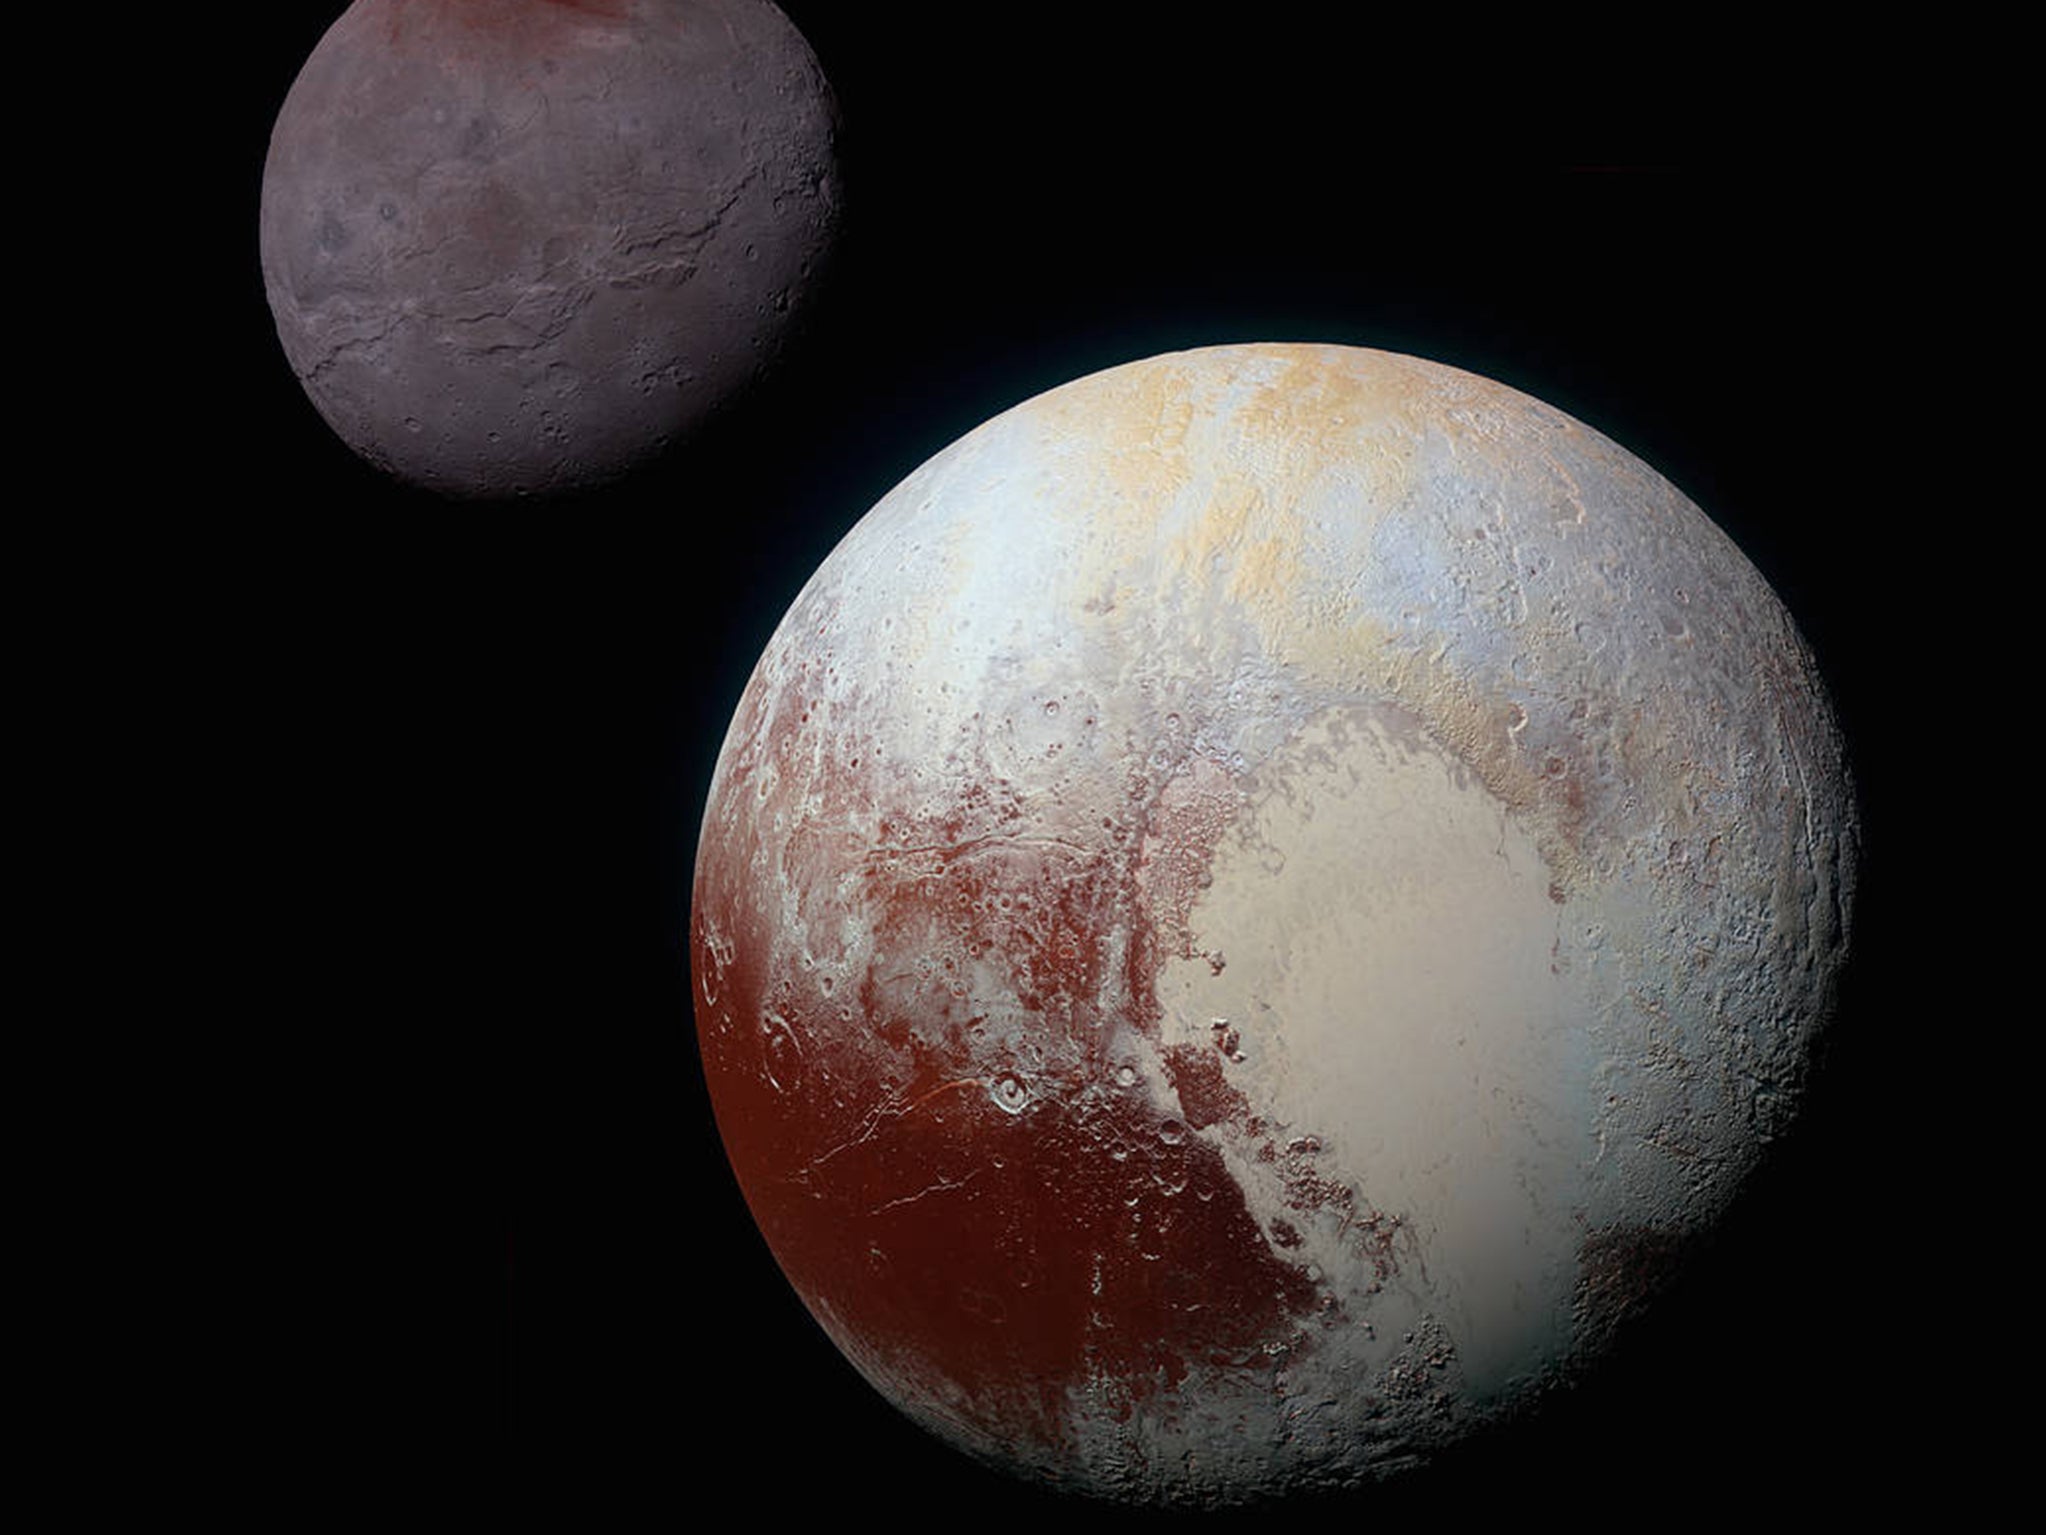 Astronomer Clyde W Tombaugh discovered Pluto on 18 February 1930